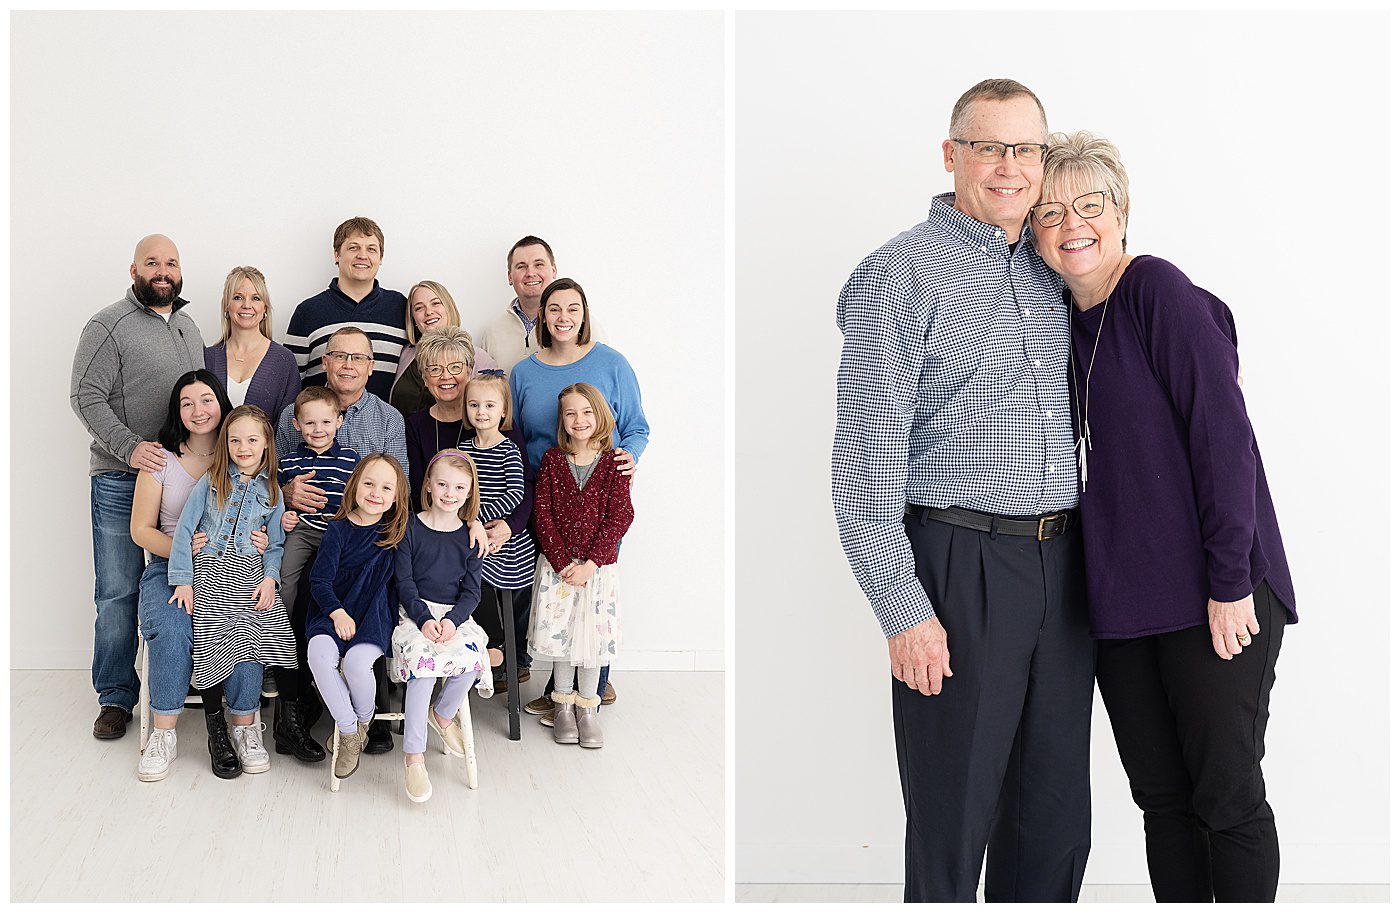 Extended family photos in studio with 15 family members against a white wall